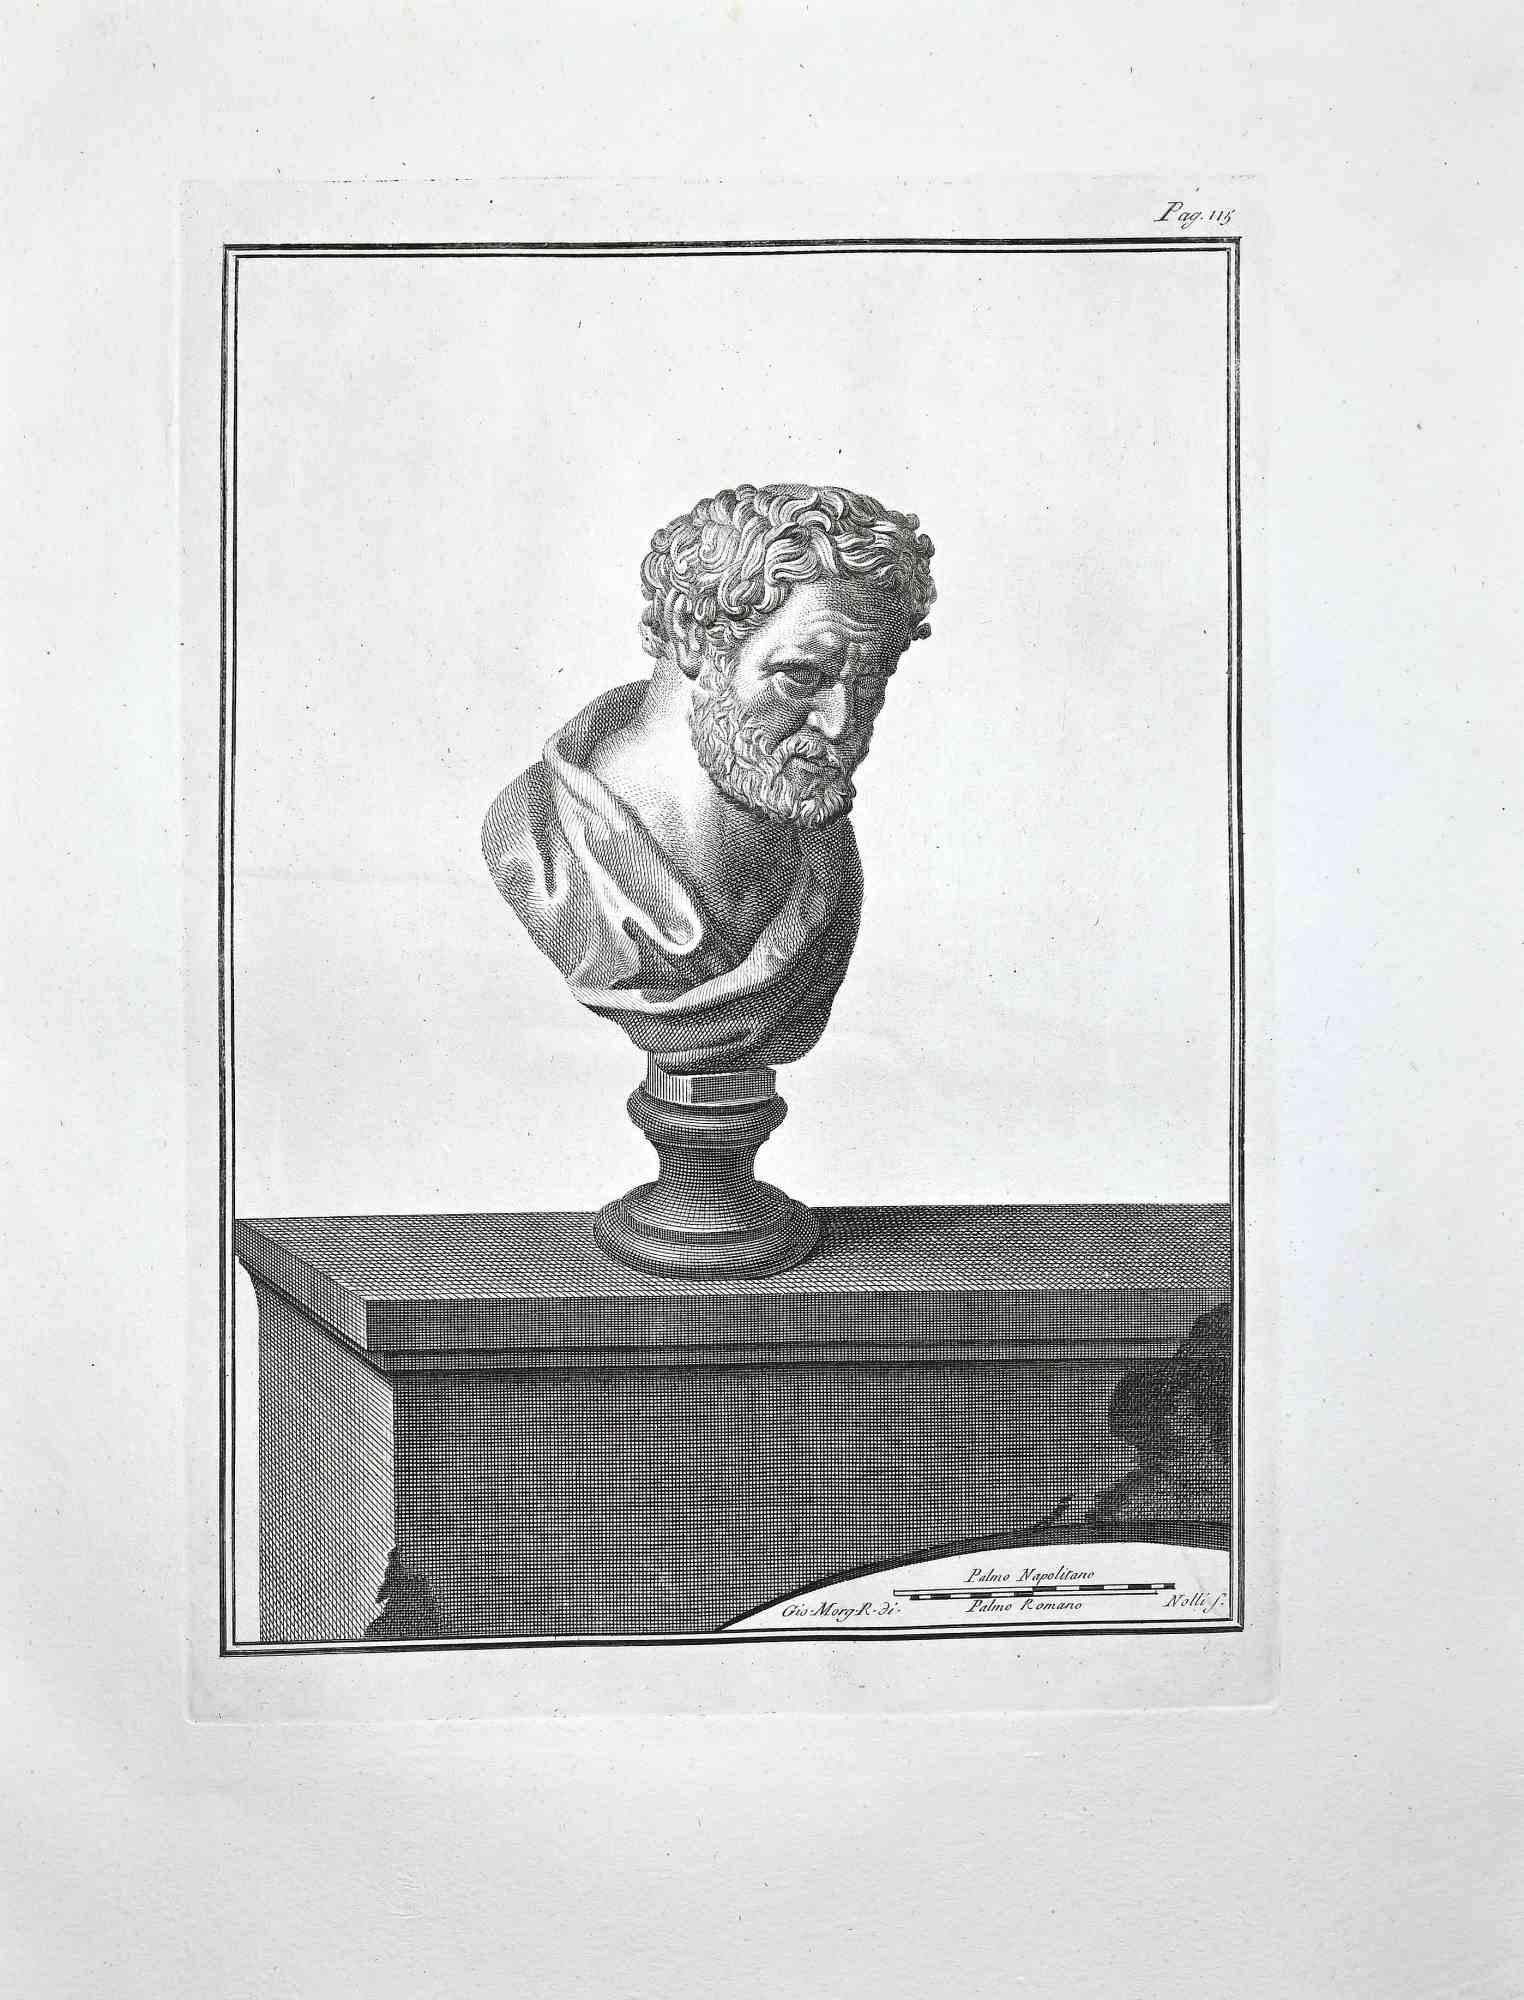 Ancient Roman Bust, from the series "Antiquities of Herculaneum", is an original etching on paper realized by Bernardino Nolli.

Signed on the plate, on the lower right.

Sehr guter Zustand.

The etching belongs to the print suite “Antiquities of